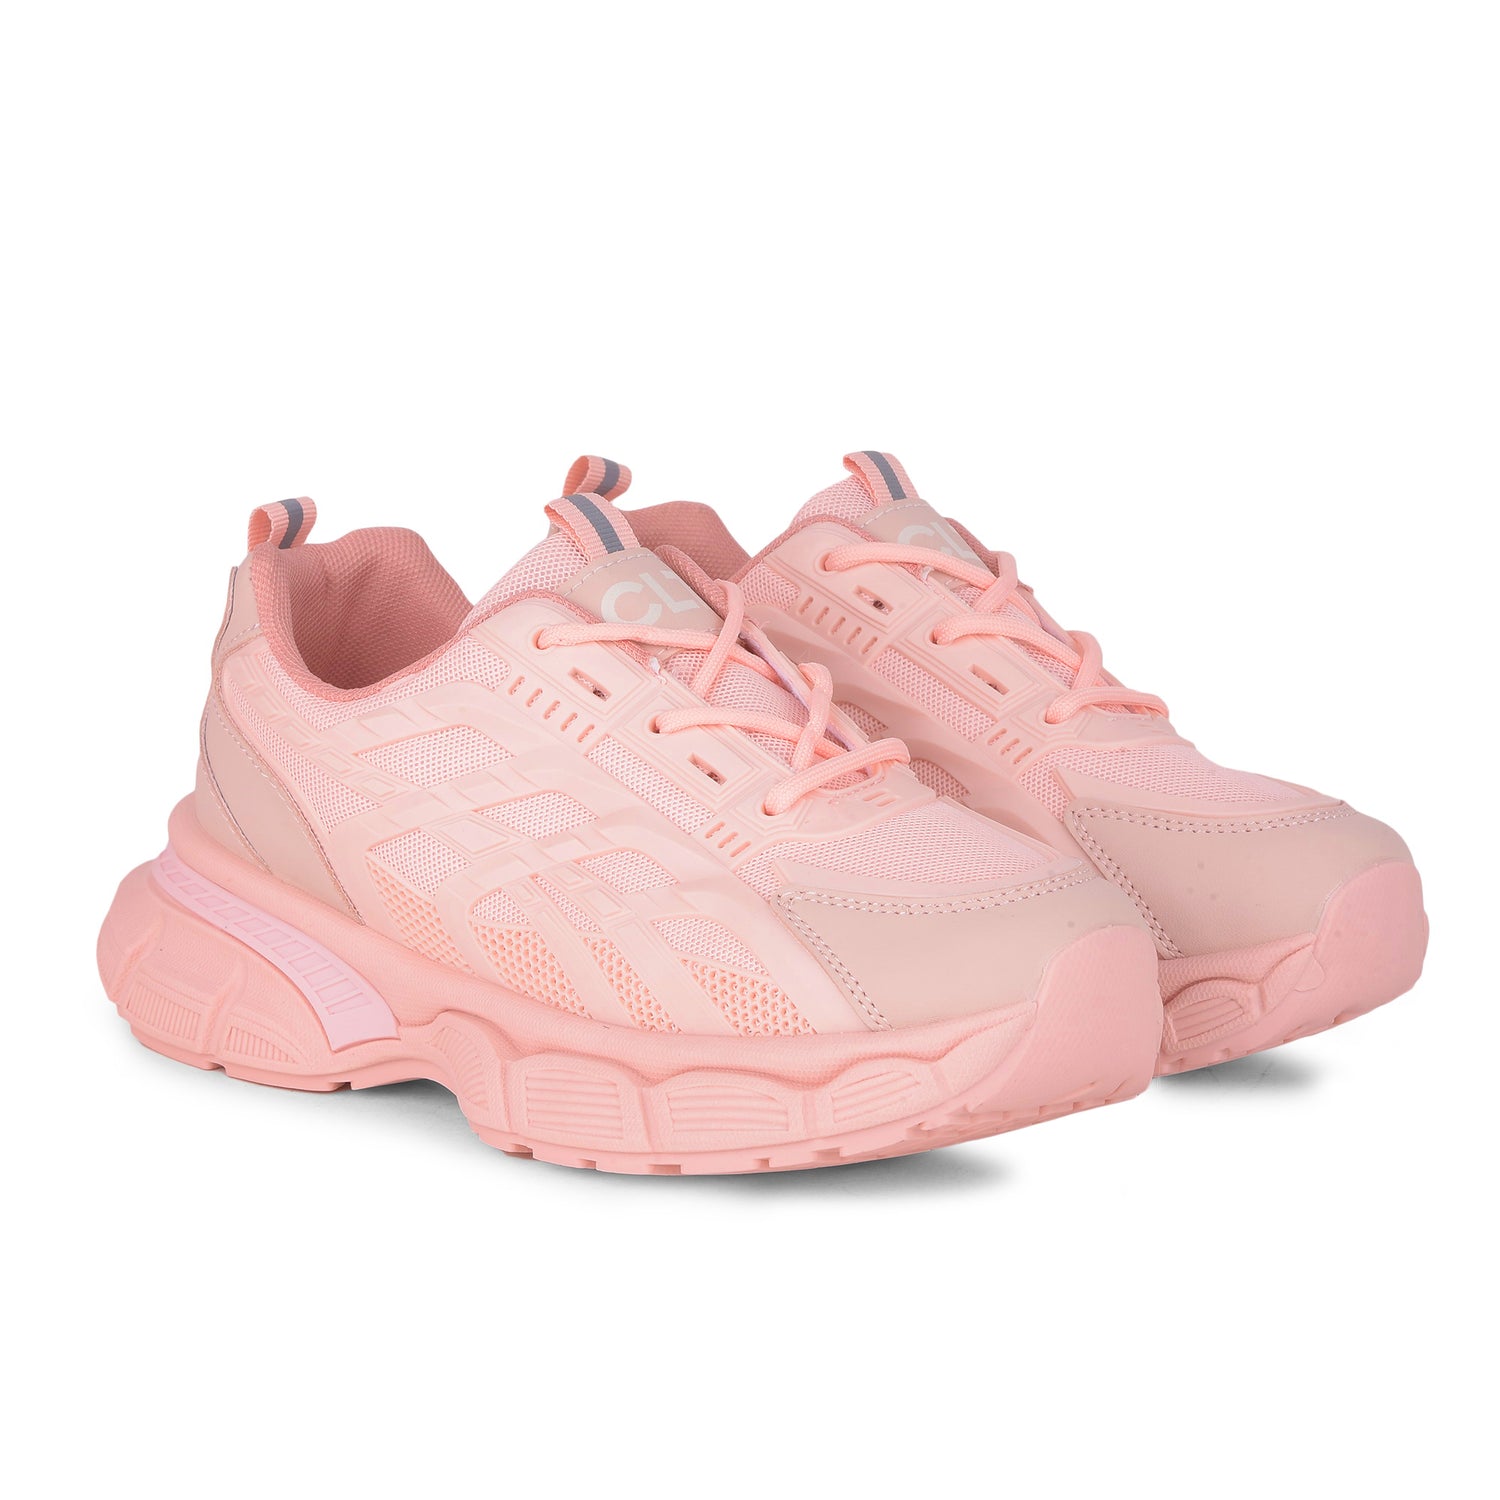 Calcetto LDS-034 Pink Women Casual Shoe